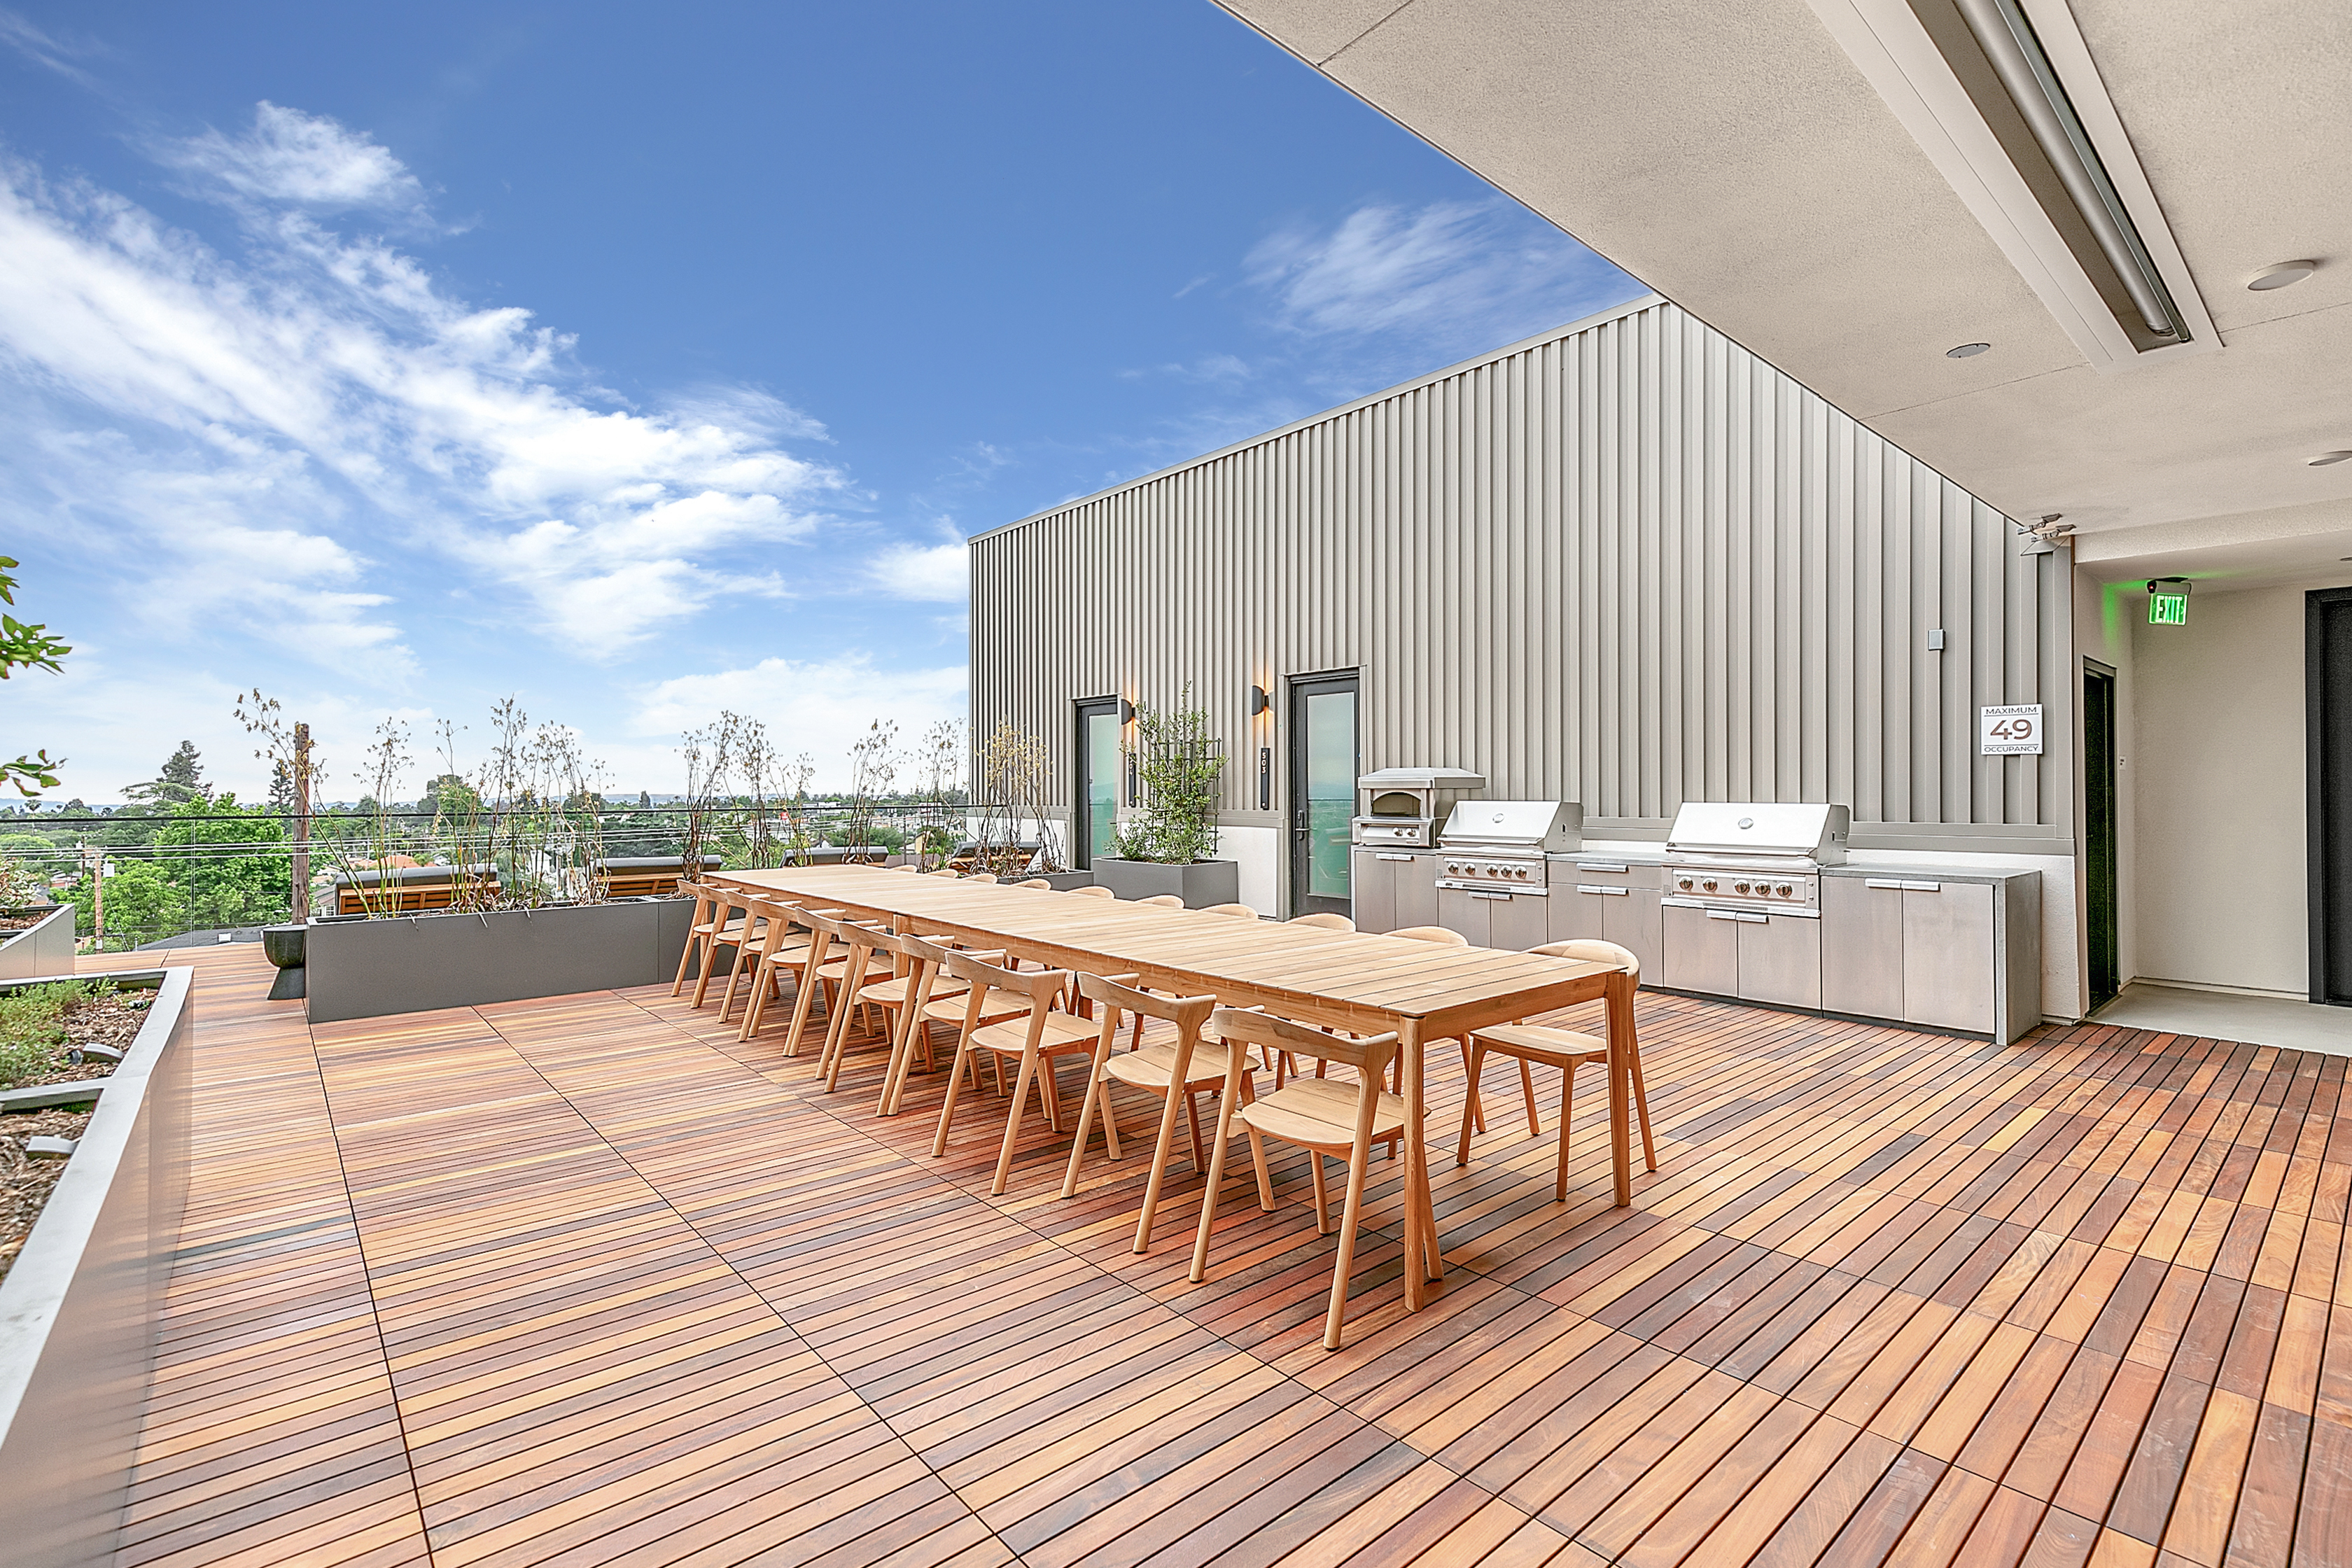 The Rinrose apartment's wooden deck features a table and chairs.